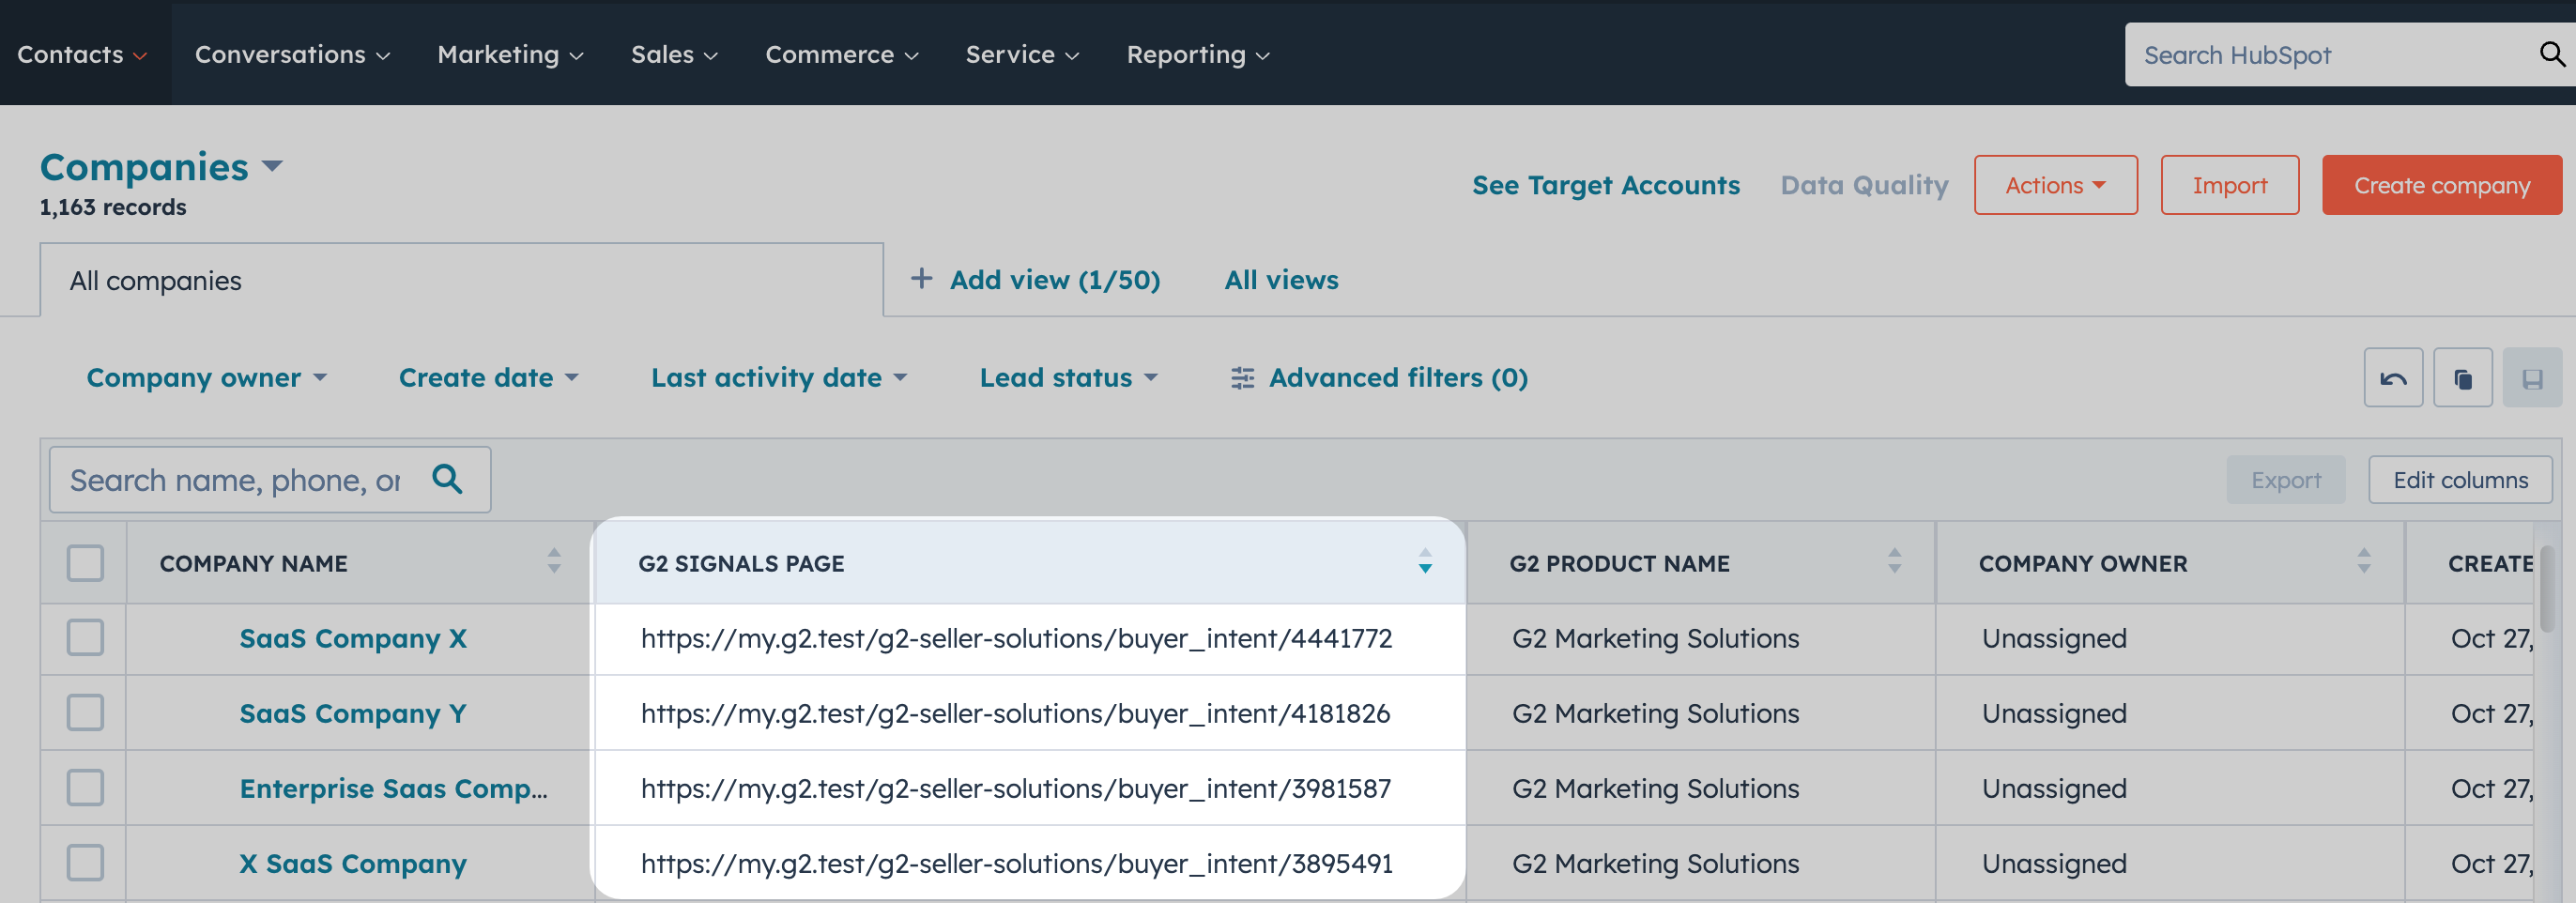 image showing G2 signals page column within the hubspot workspace